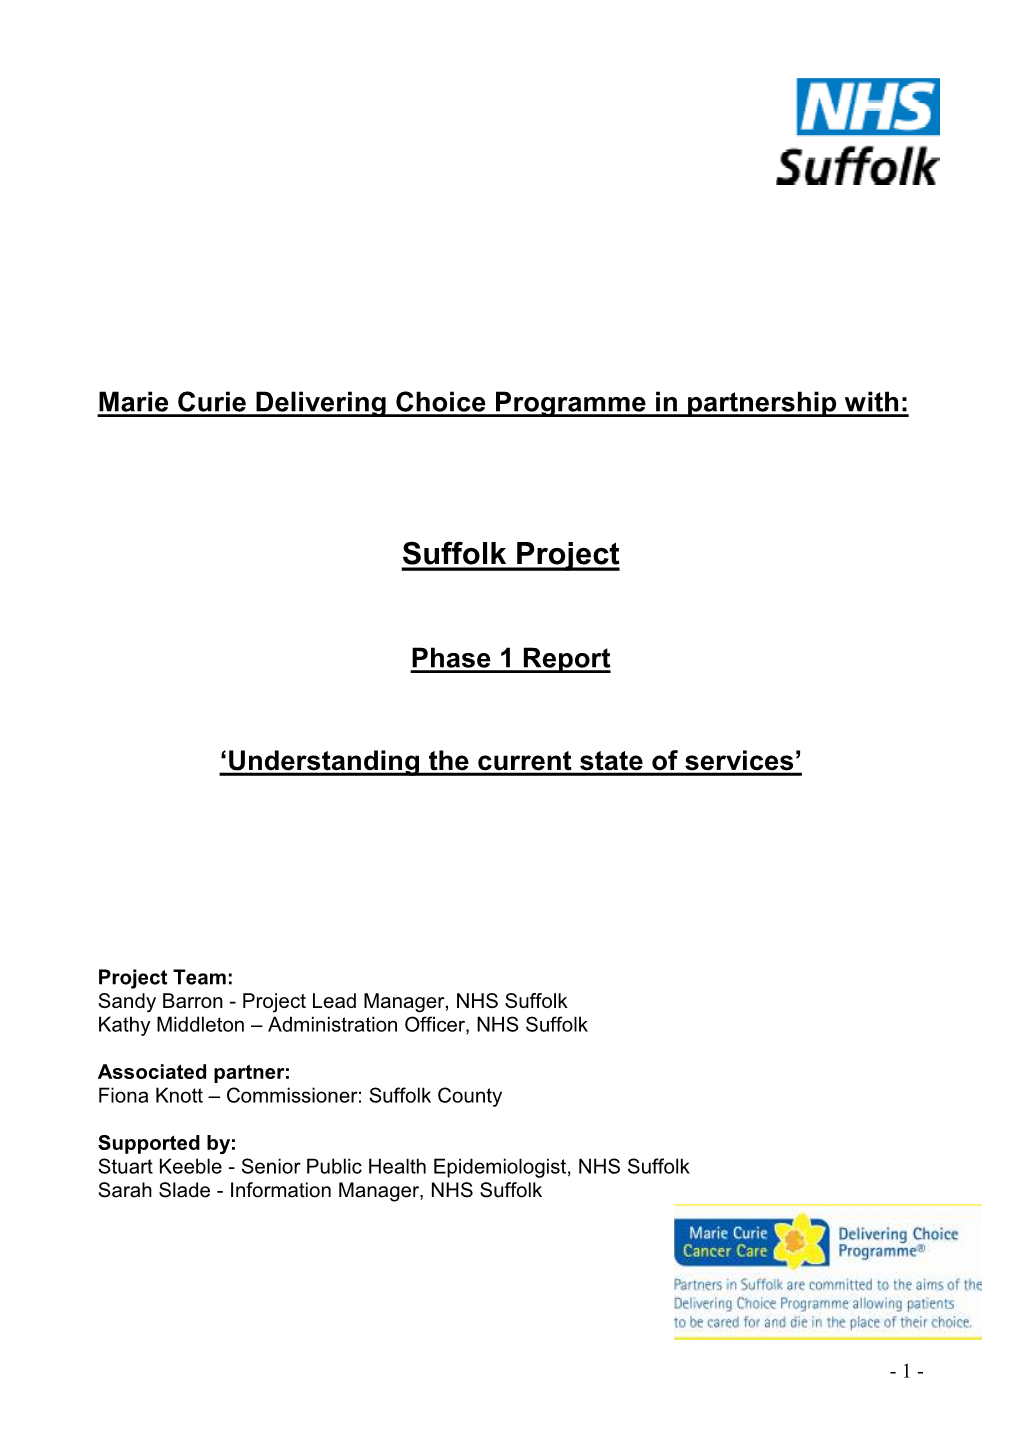 Marie Curie Delivering Choice Programme in Partnership With